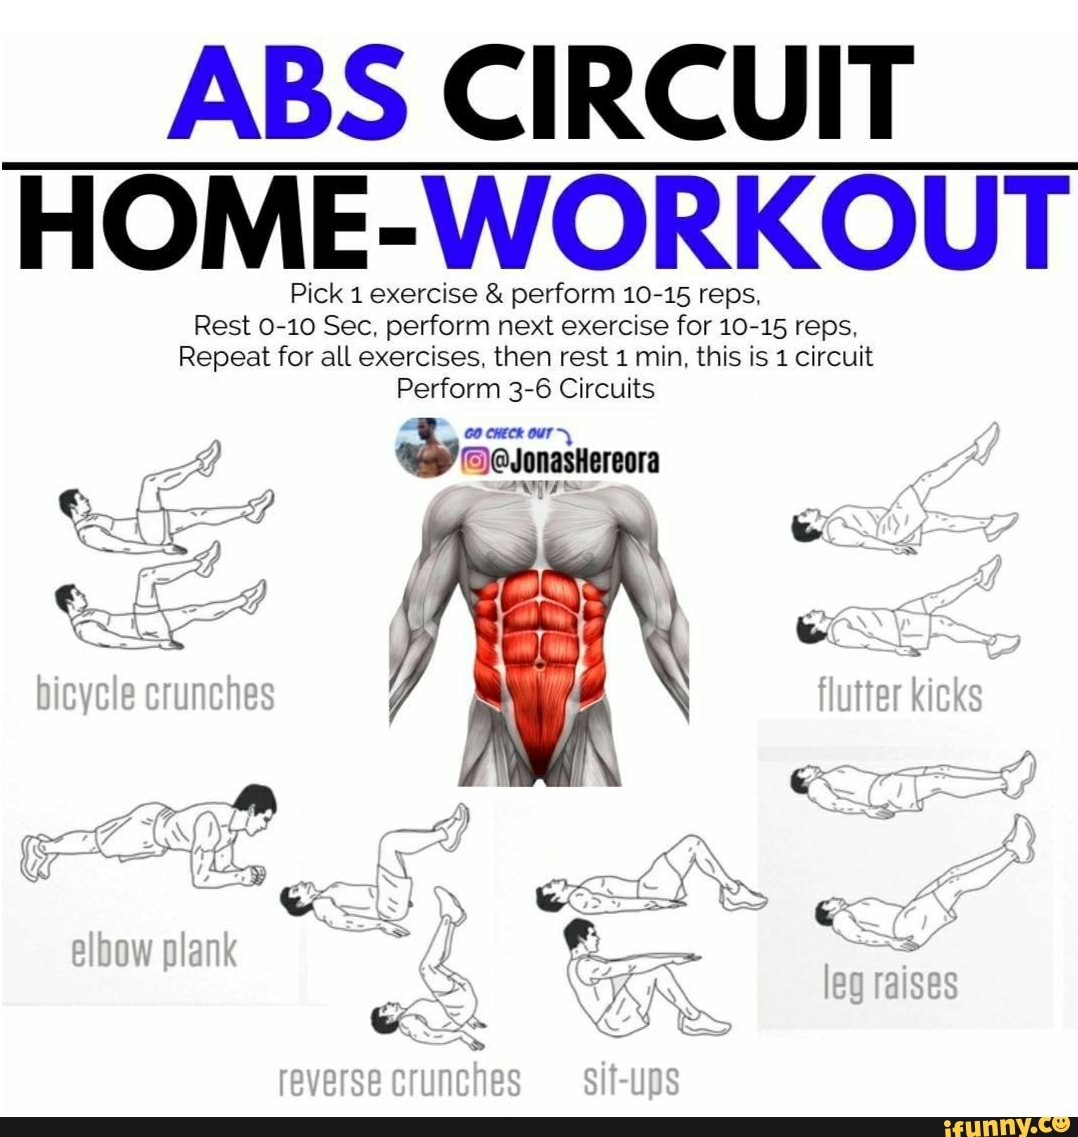 Abs Circuit Home Workout Pick 1 Exercise Perform 10 15 Reps Rest 0 10 Sec Perform Next